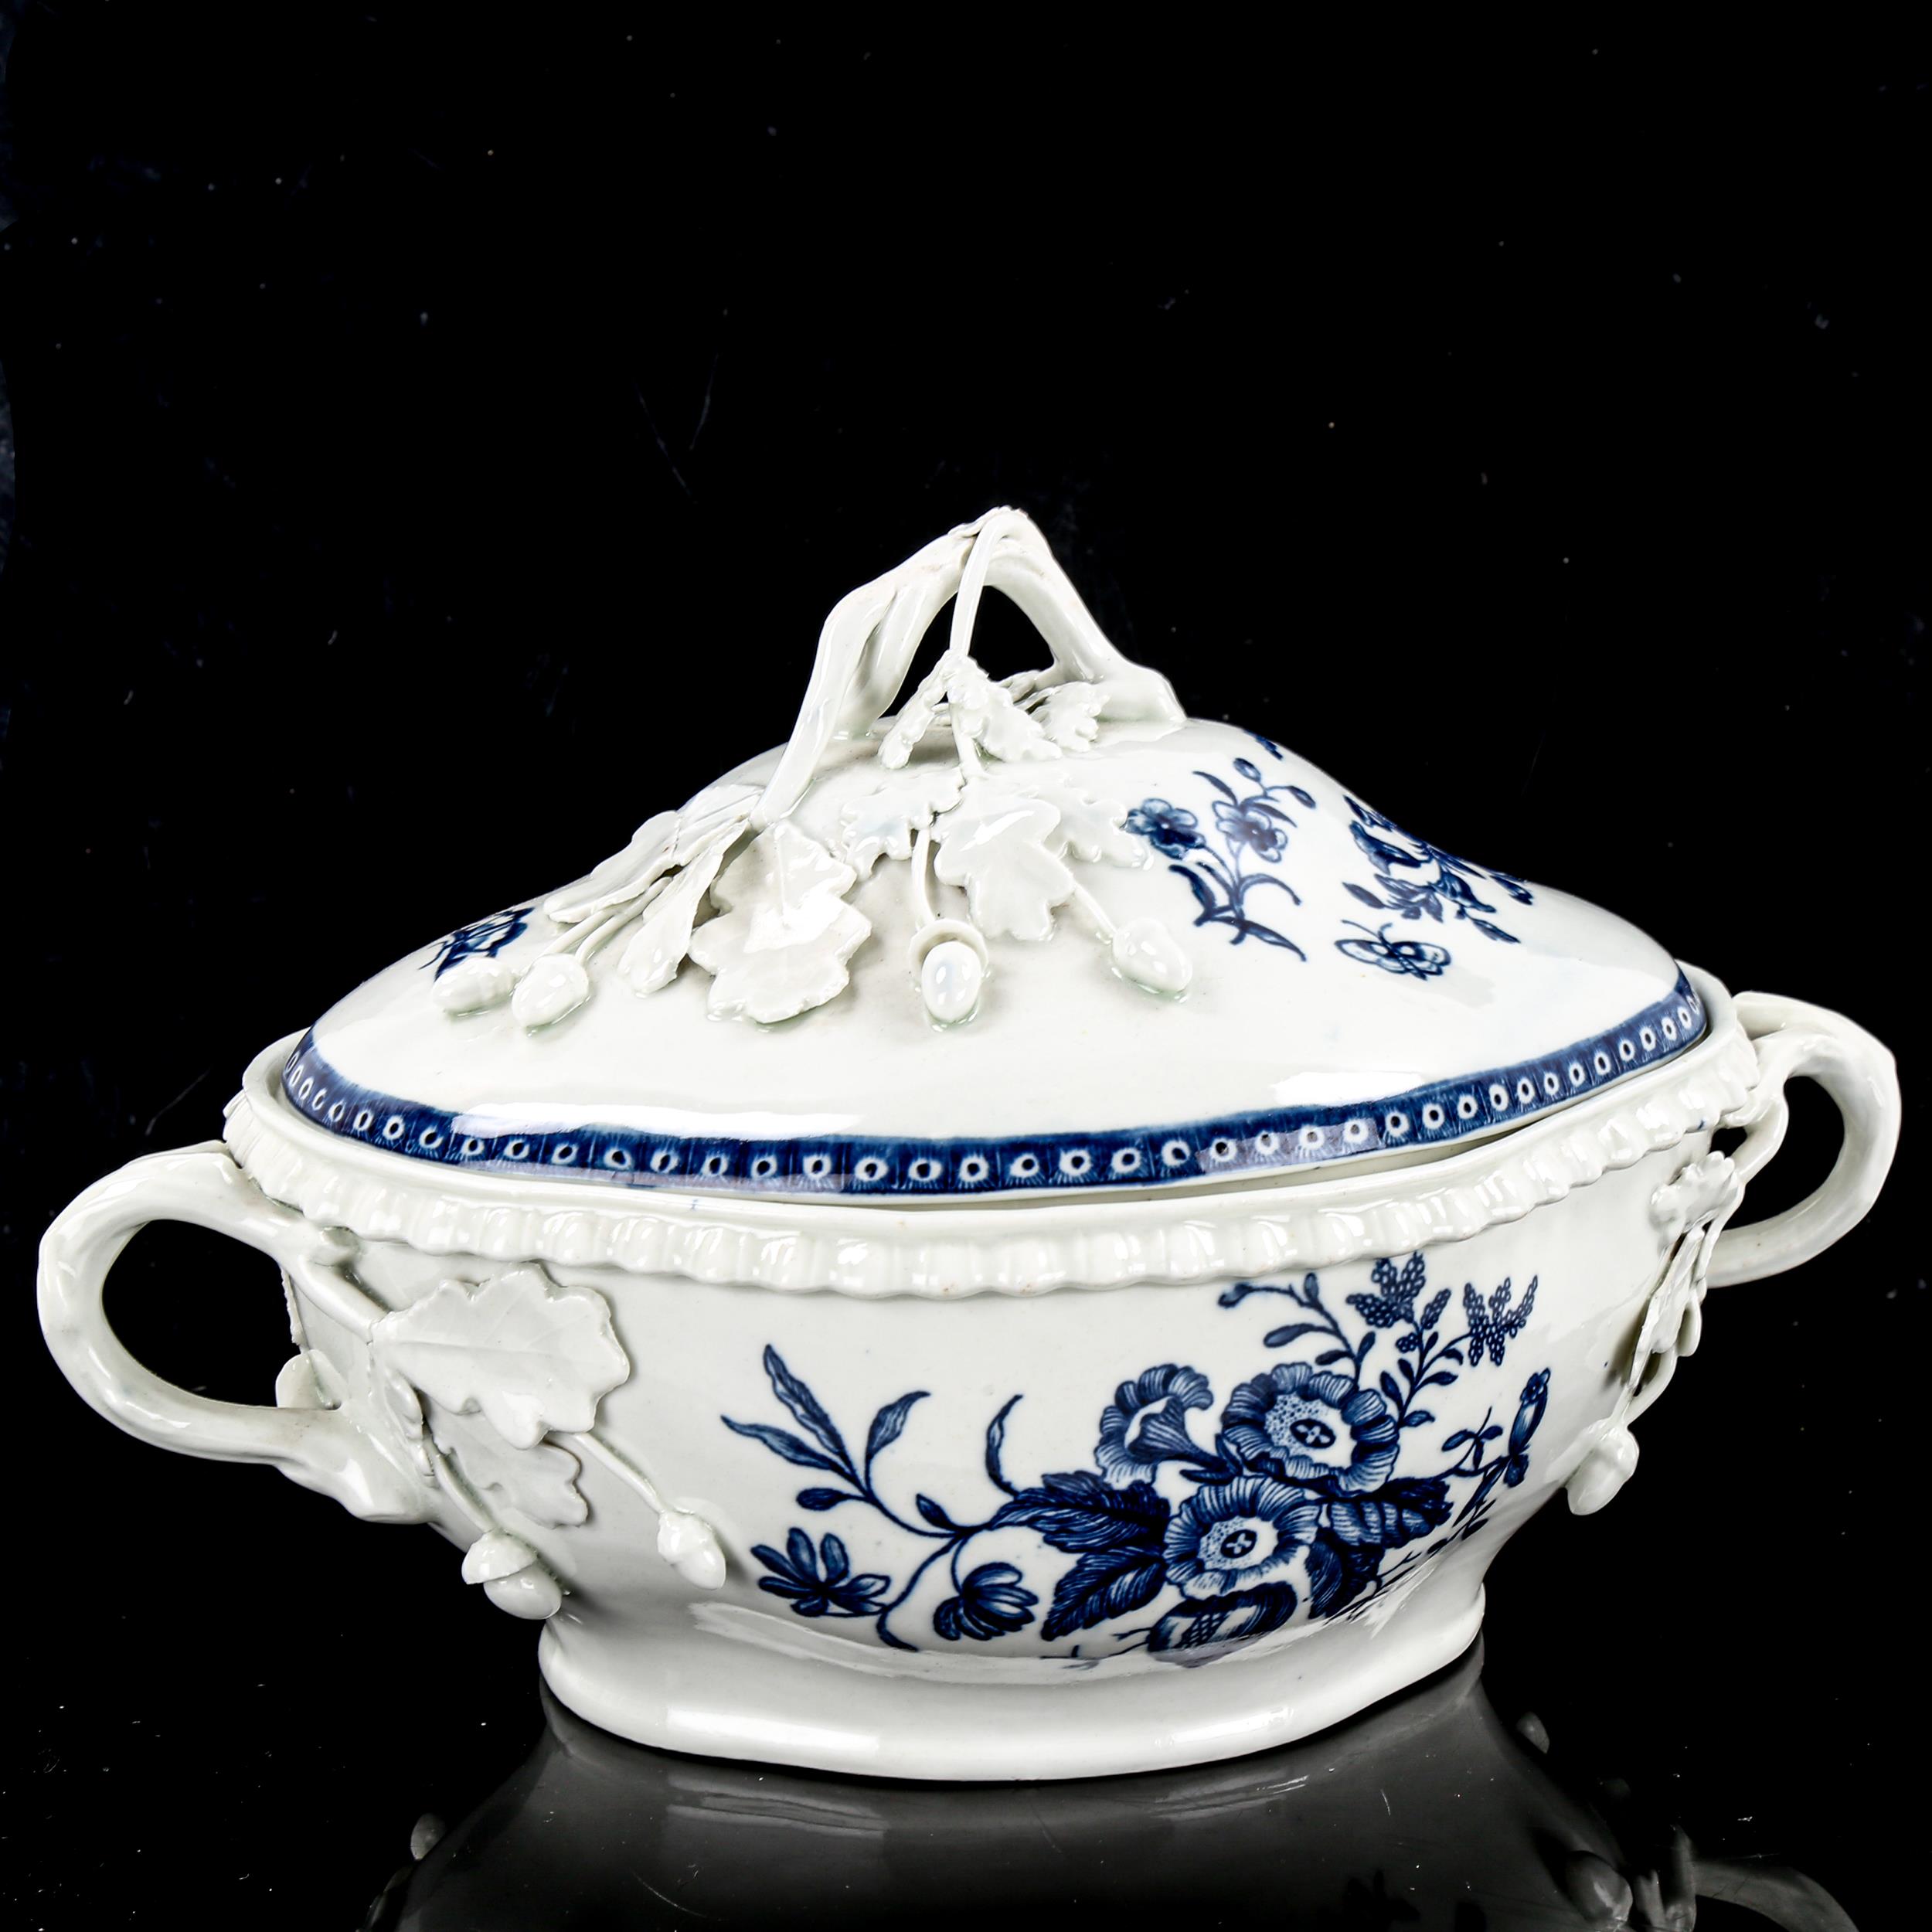 An 18th century Worcester blue and white porcelain tureen and cover, circa 1770, cabbage rose